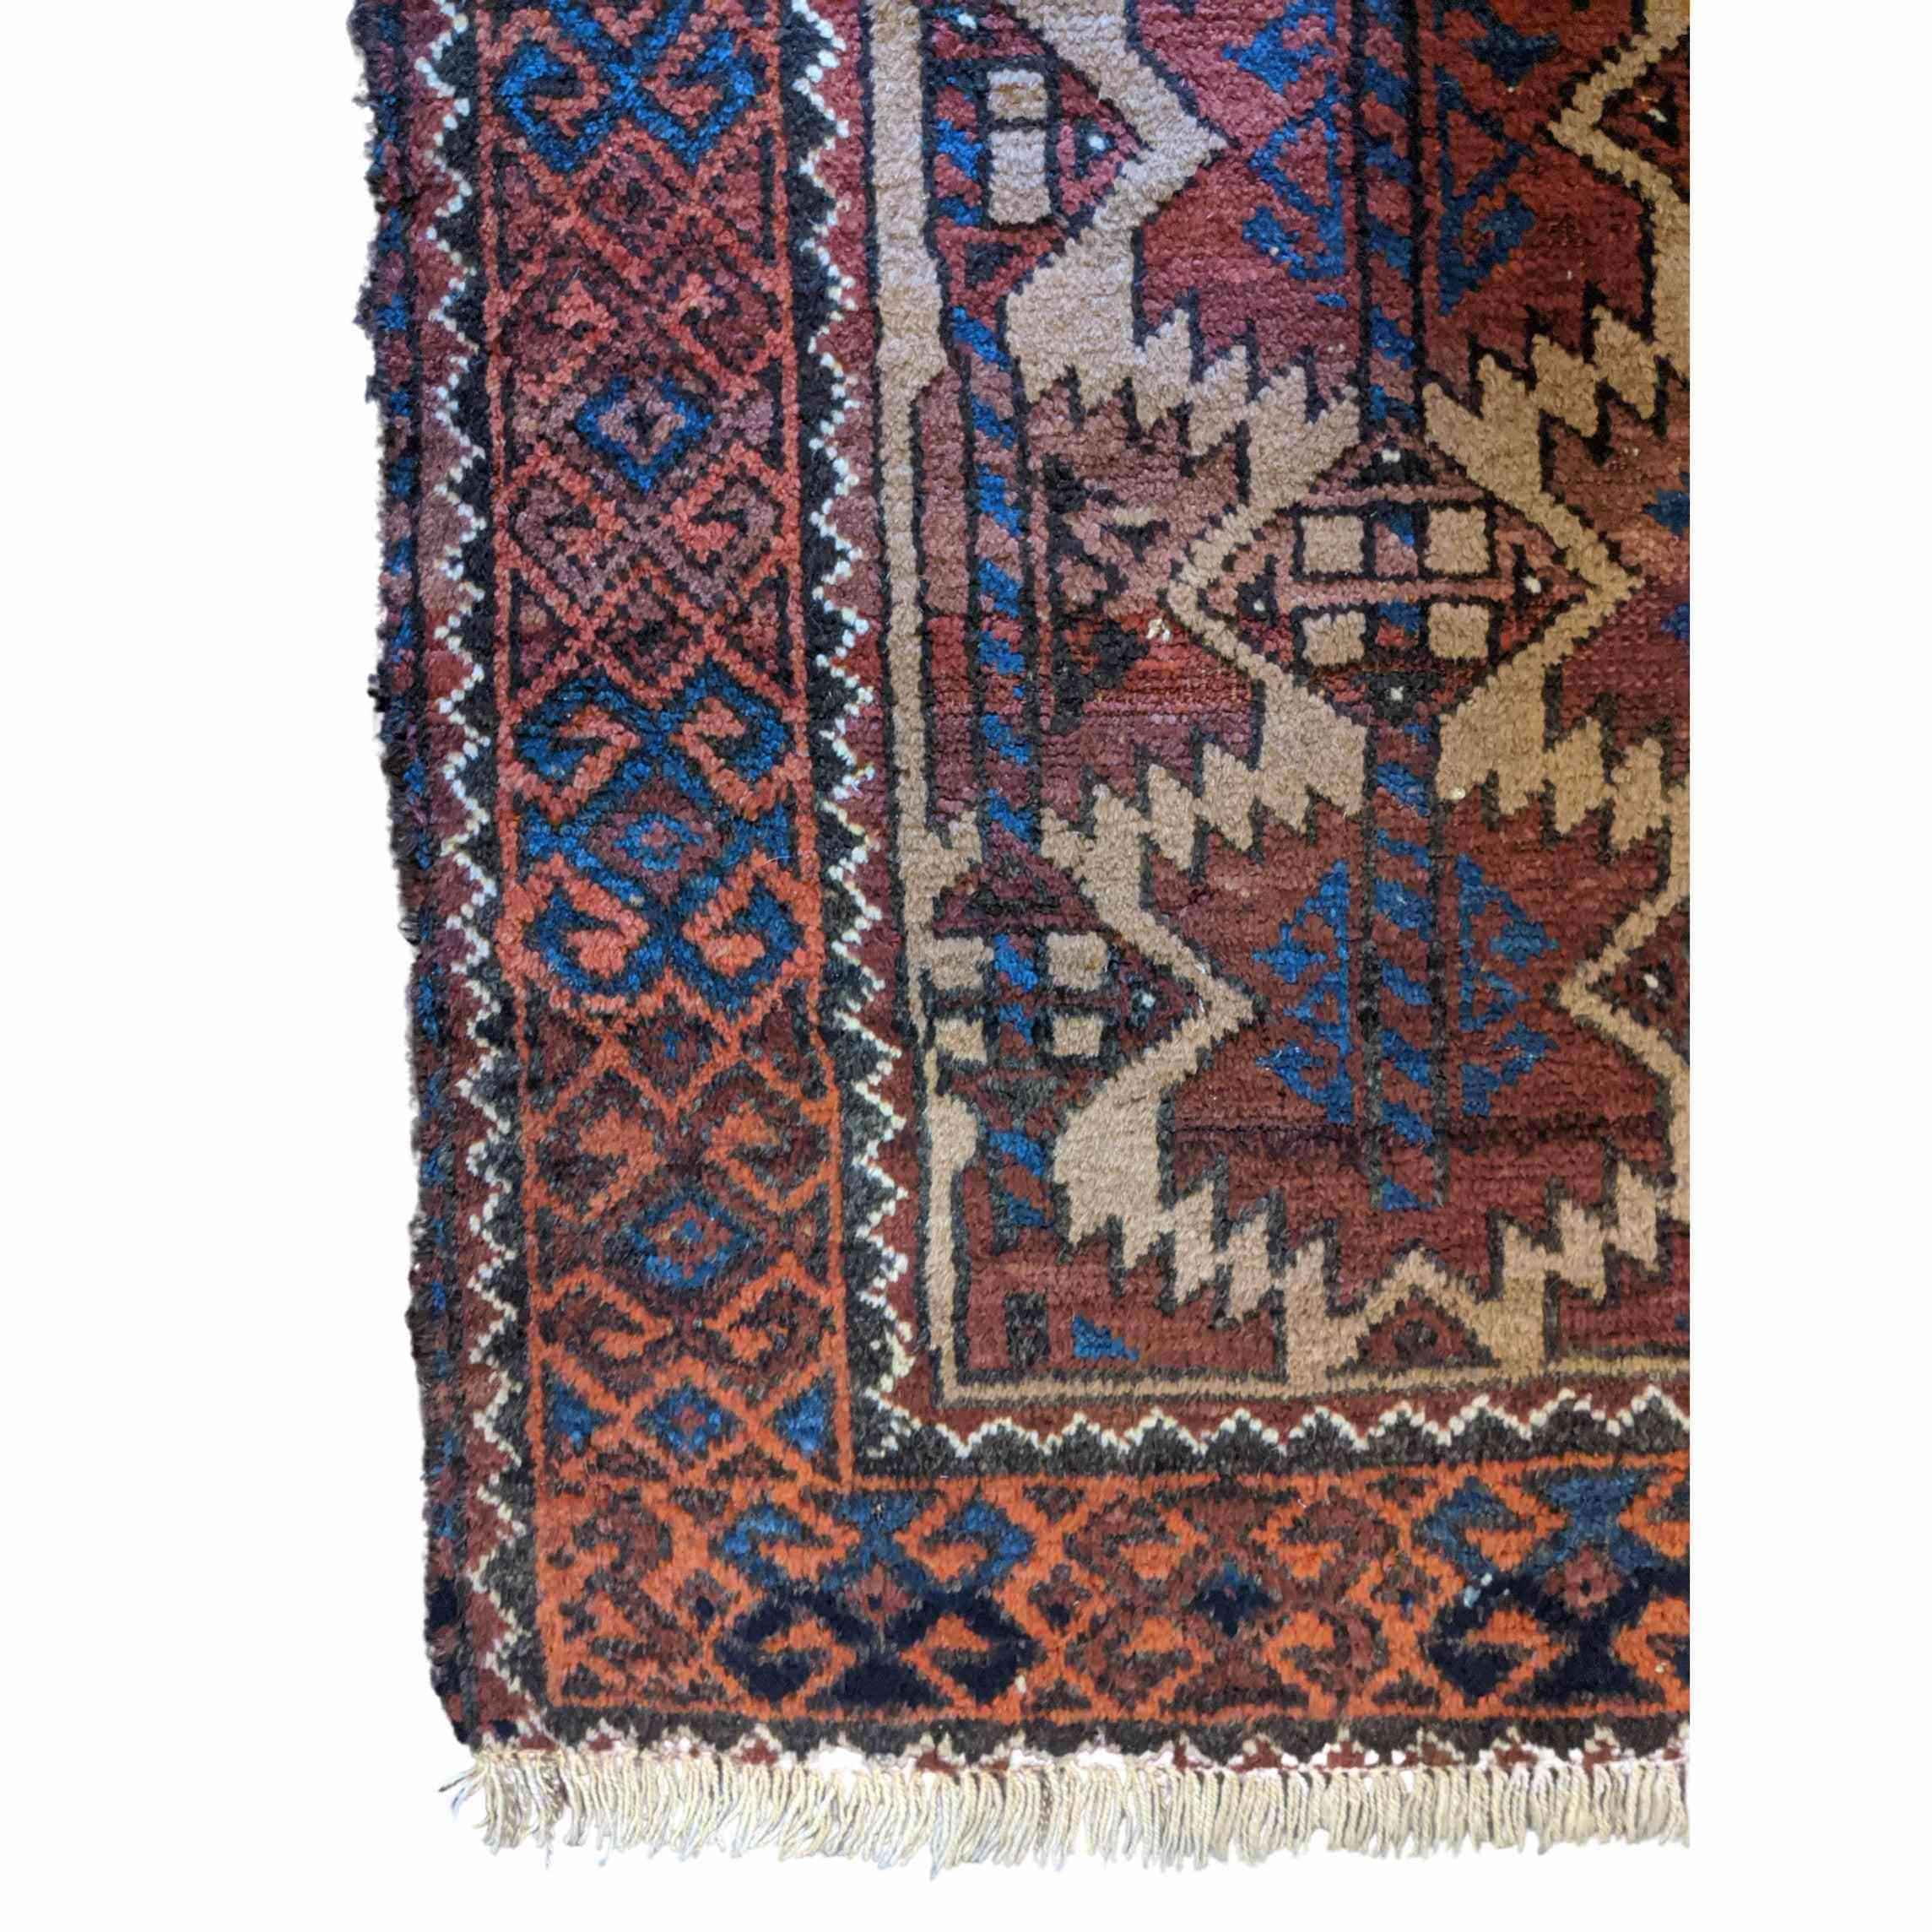 130 x 82 cm Persian Baluch Tribal Beige Small Rug - Rugmaster